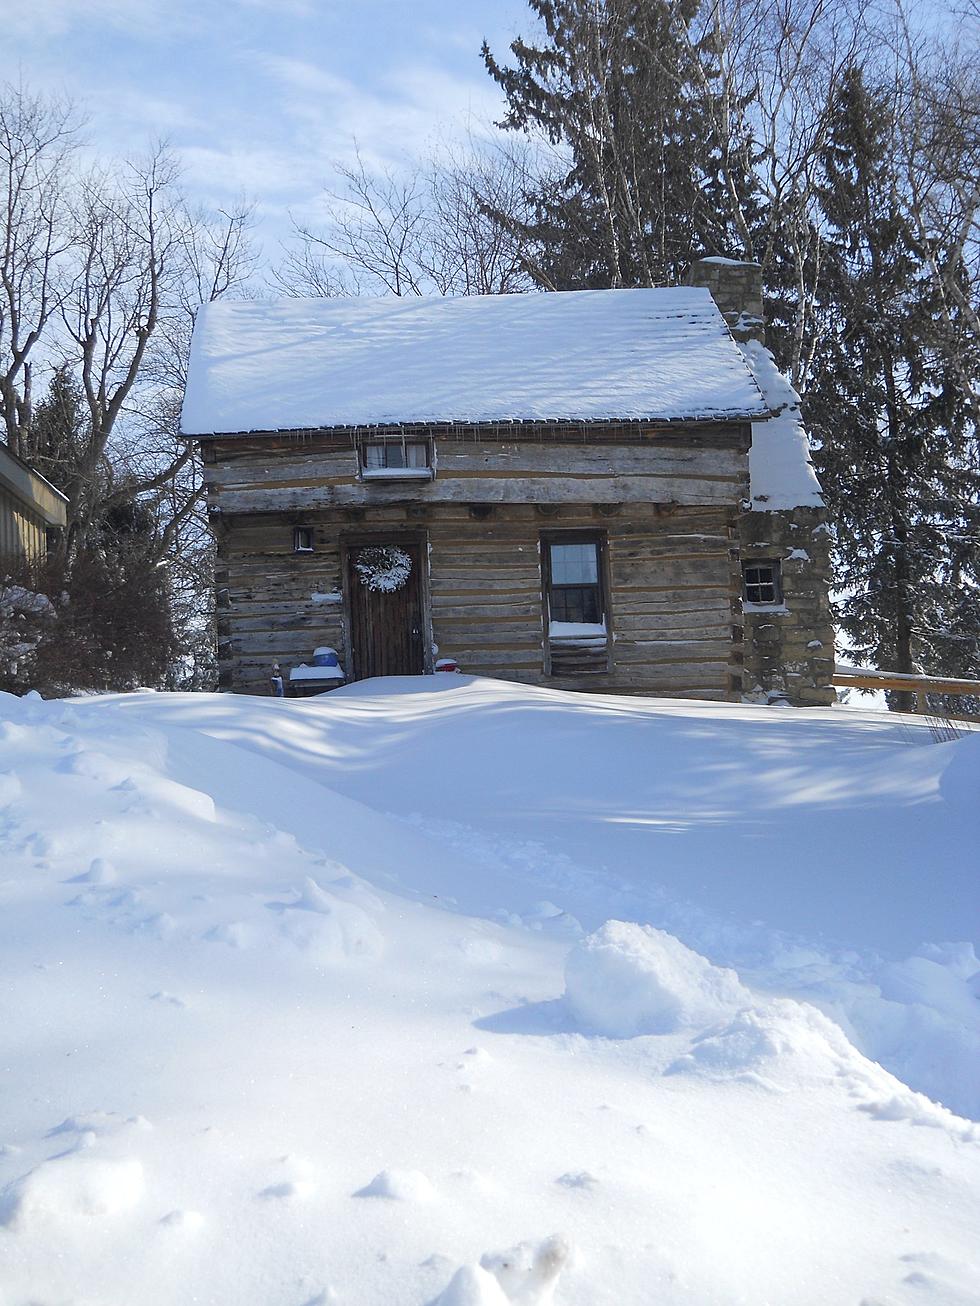 Spark Up Some Winter Romance at This Historic Cabin in Wisconsin